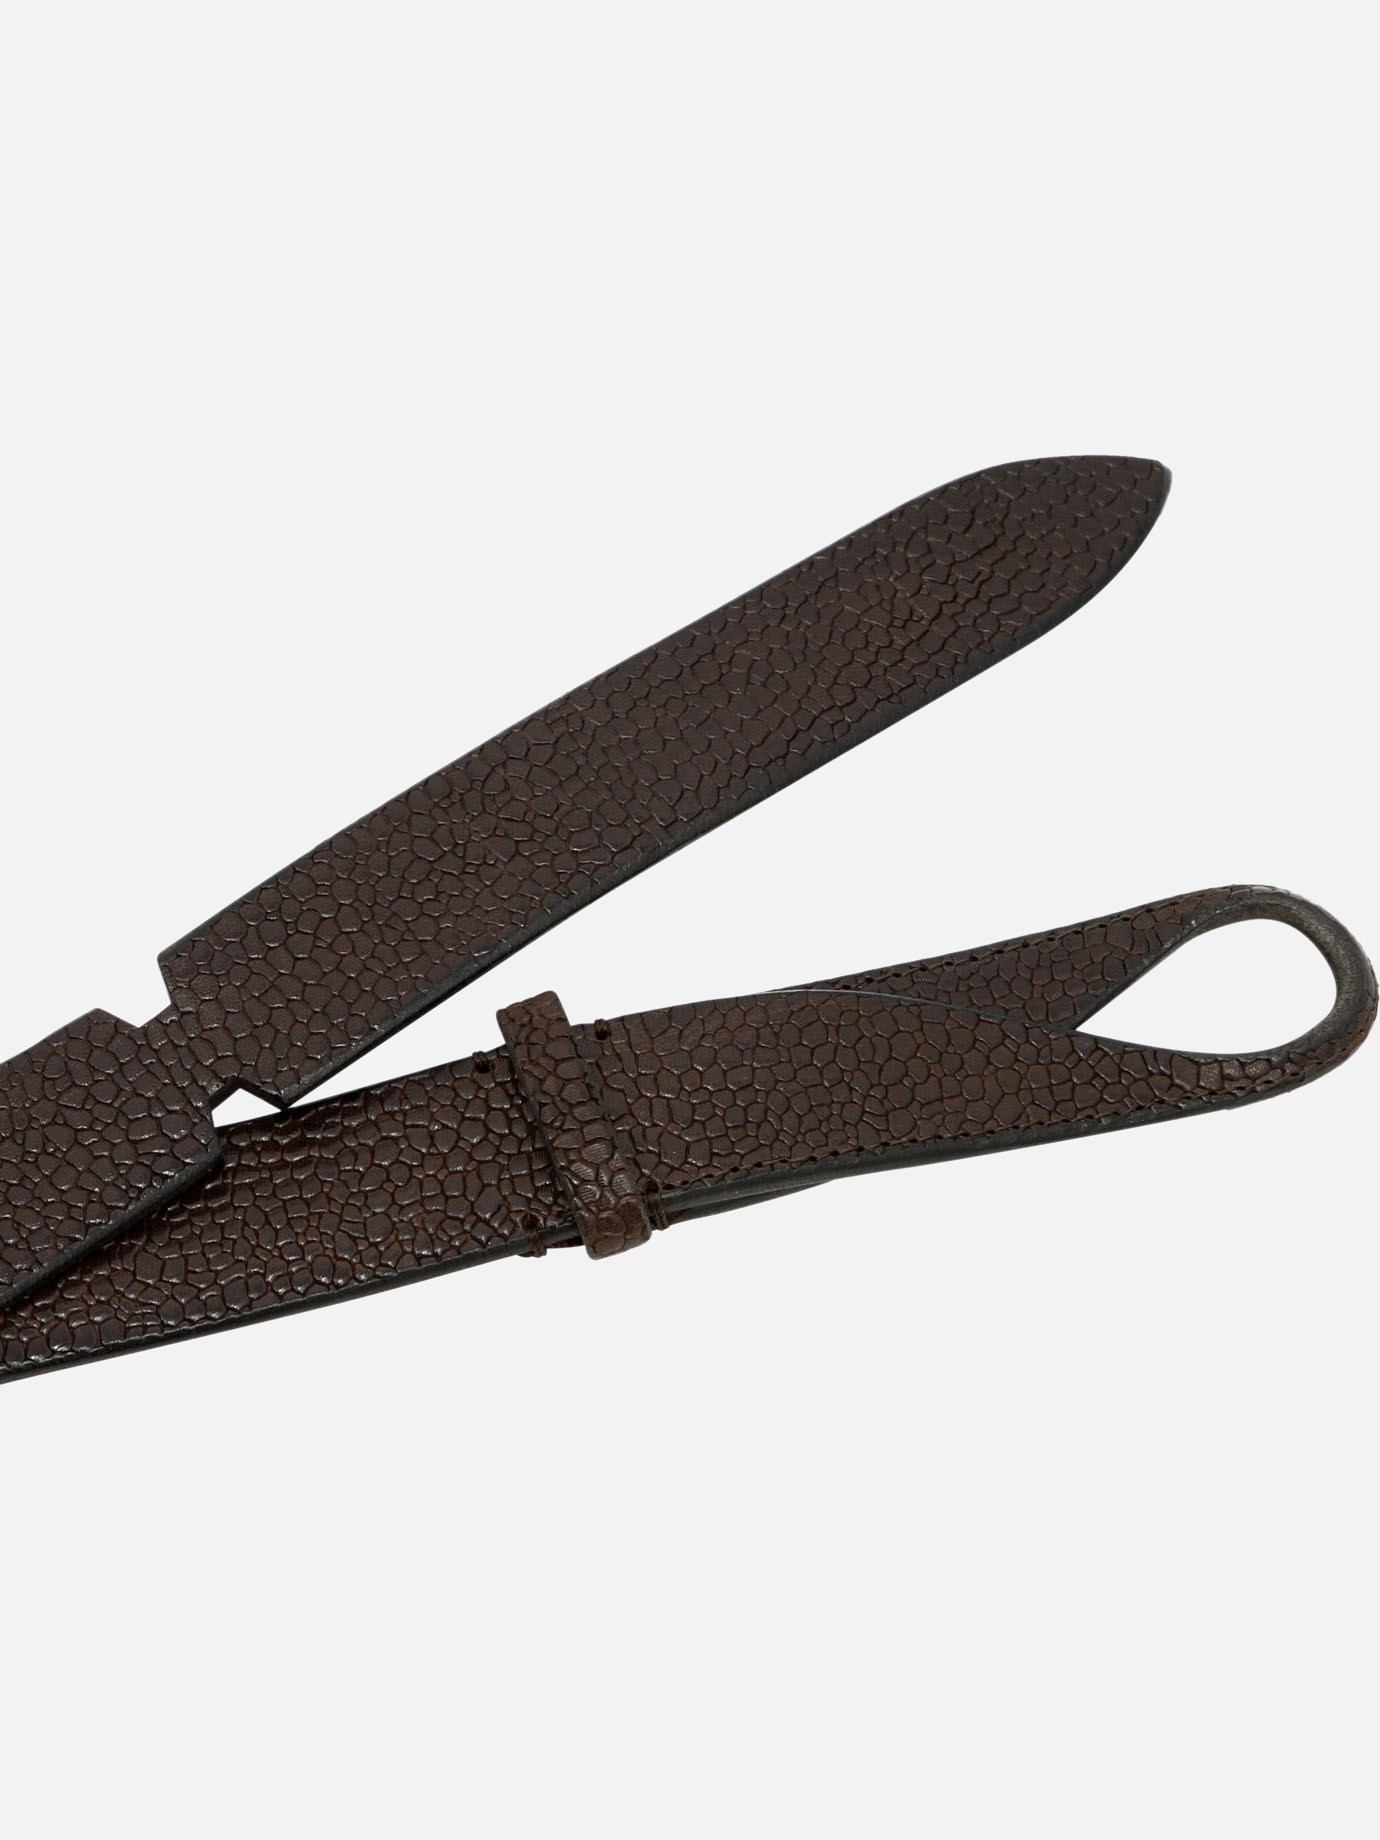  Nobuckle  belt by Orciani